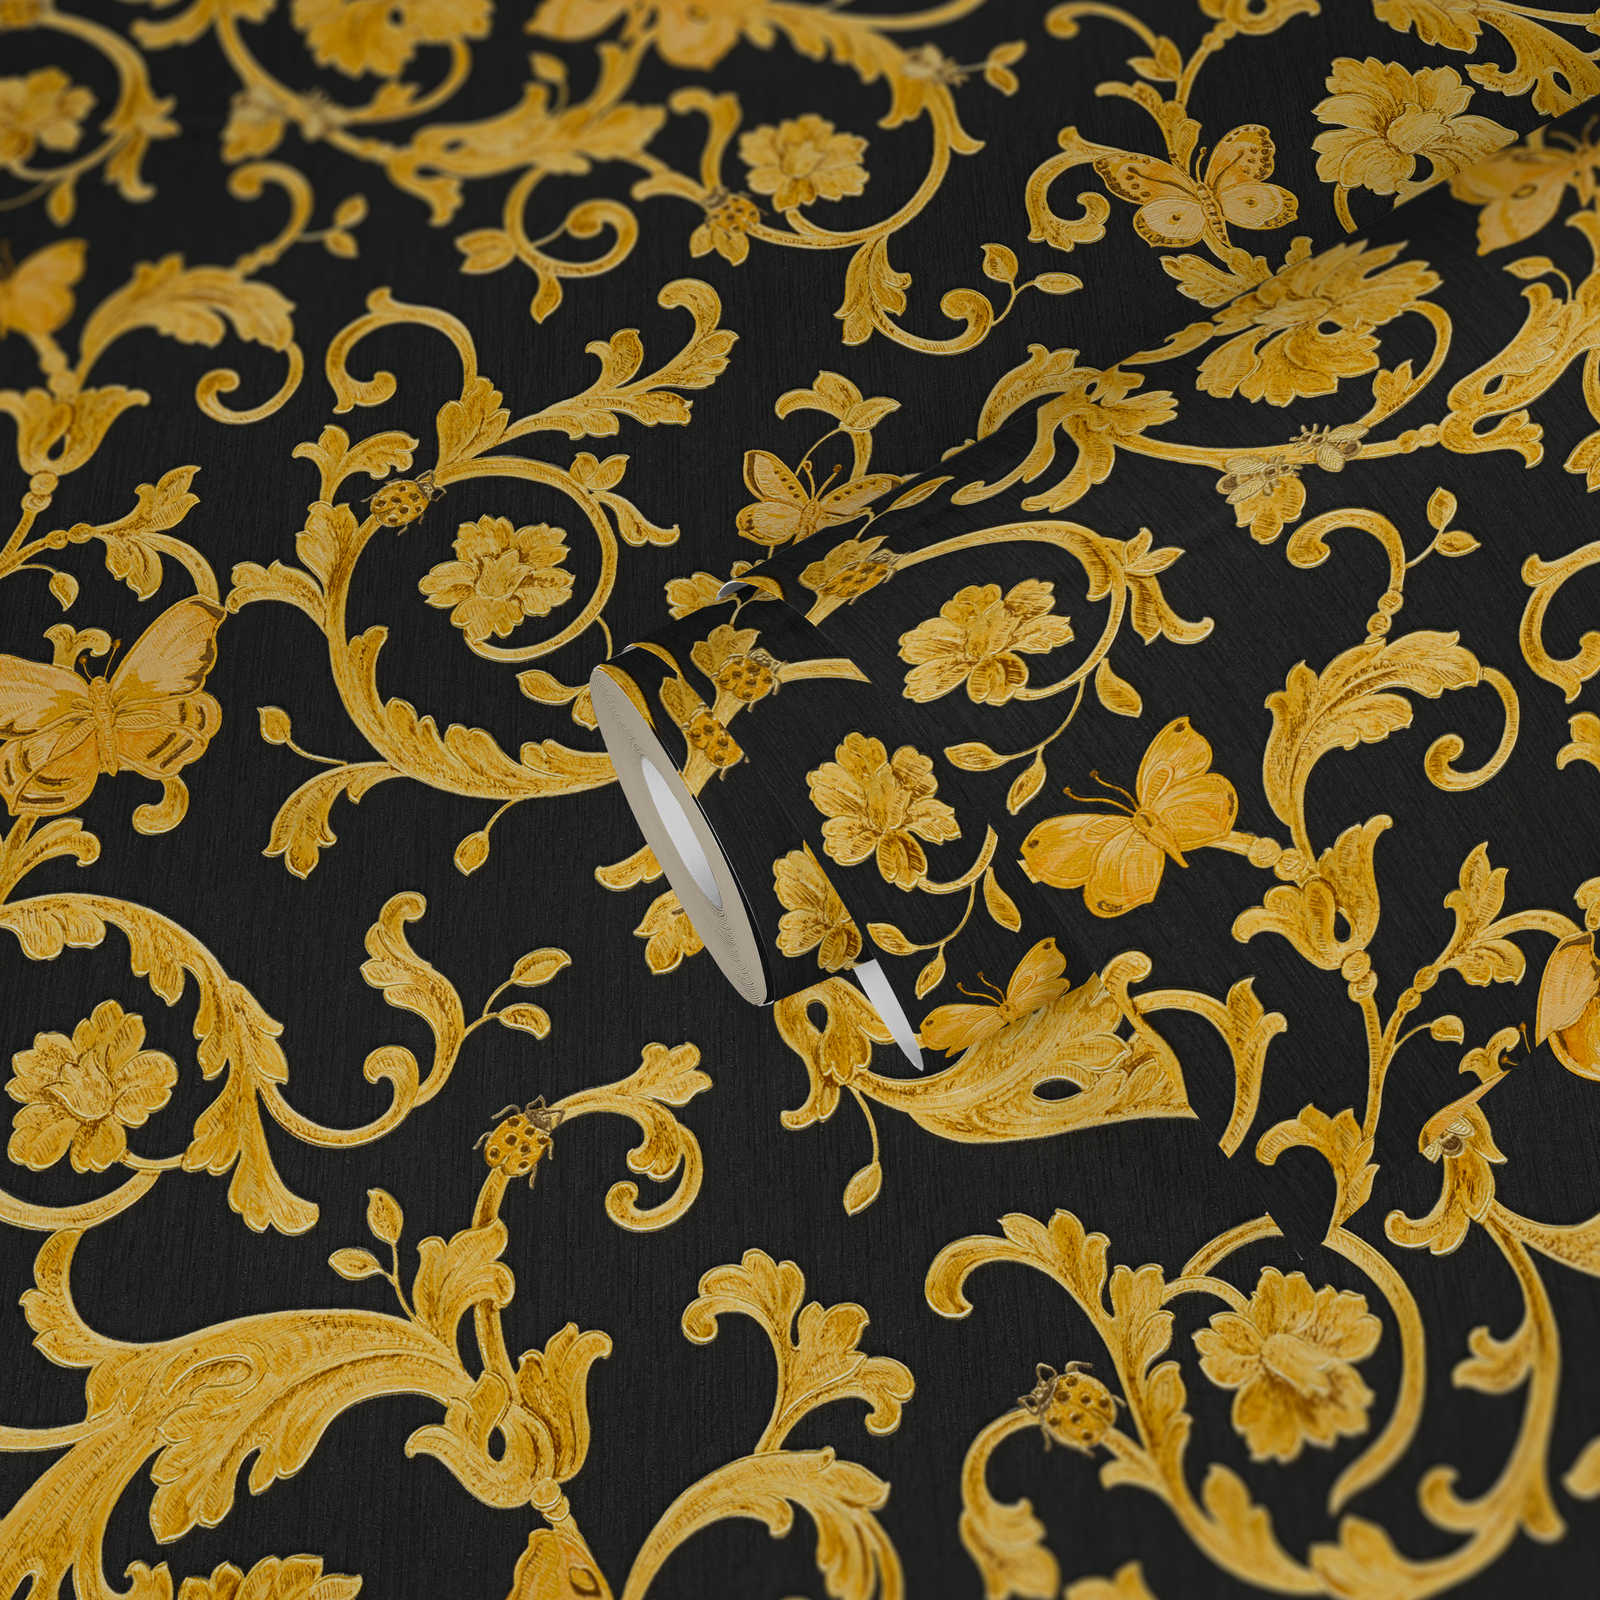             Black VERSACE wallpaper with gold ornaments & butterfly
        